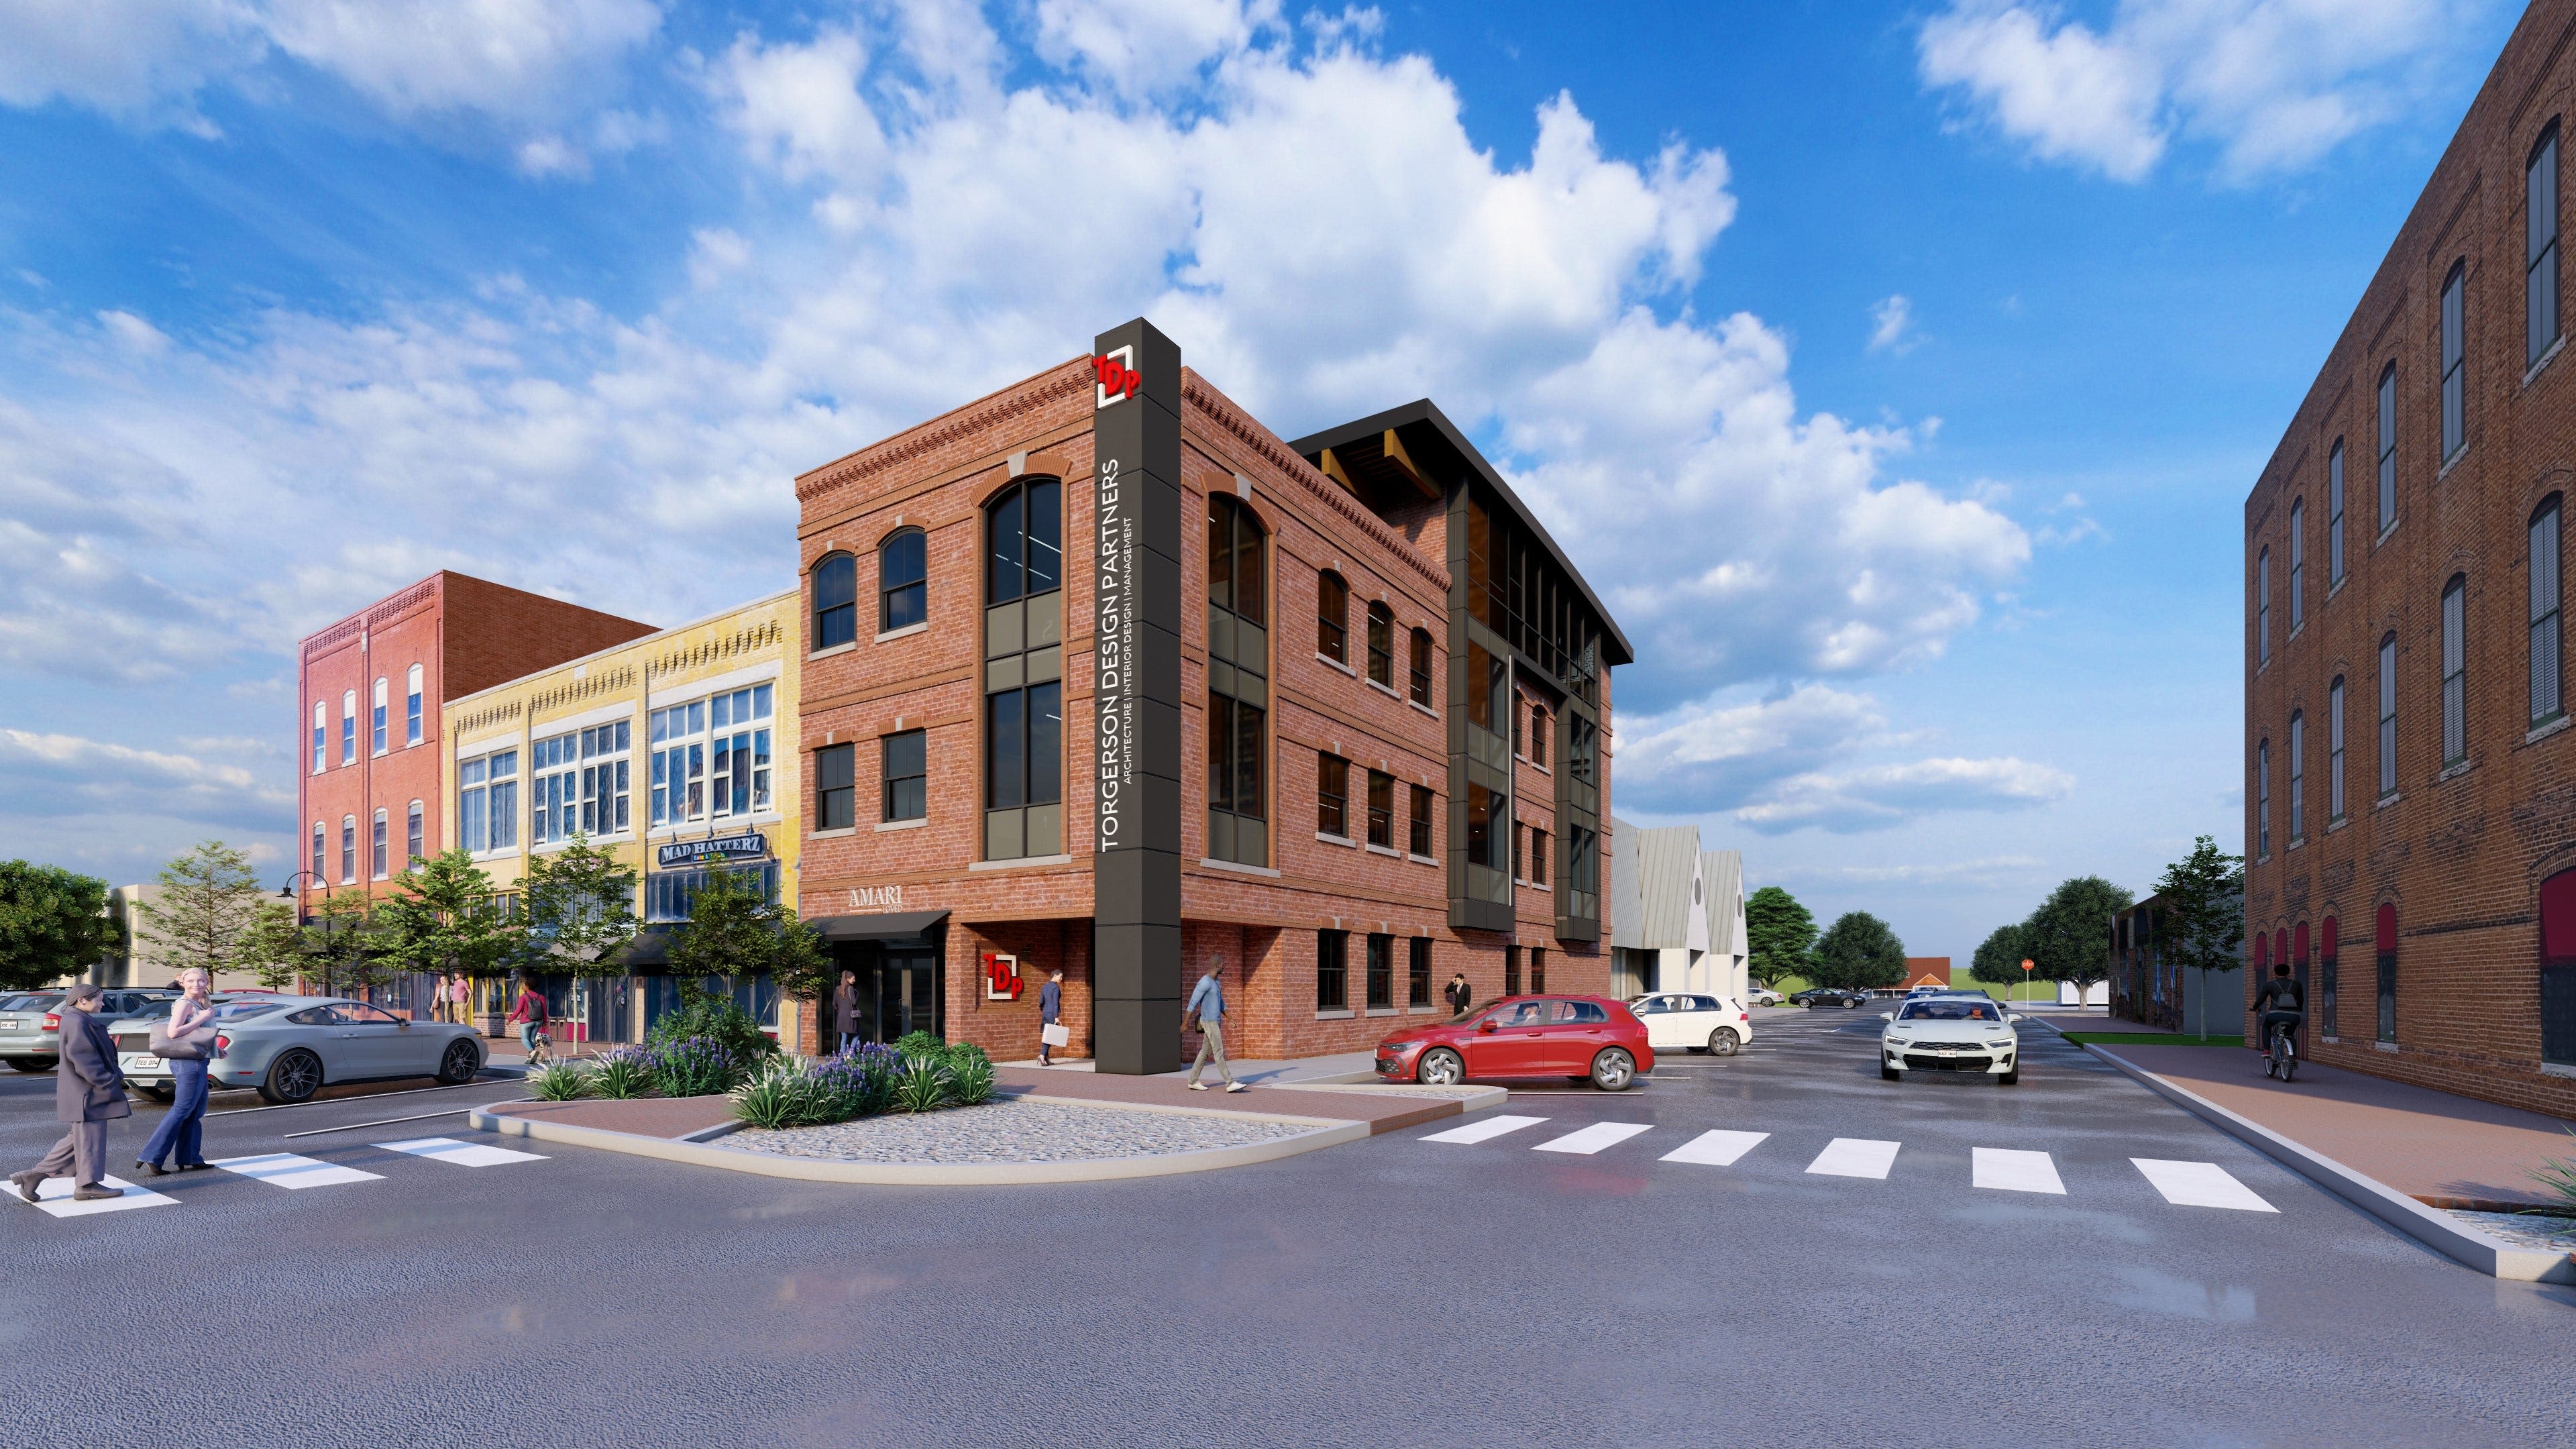 New development approved for Ozark square in place of collapsed downtown building